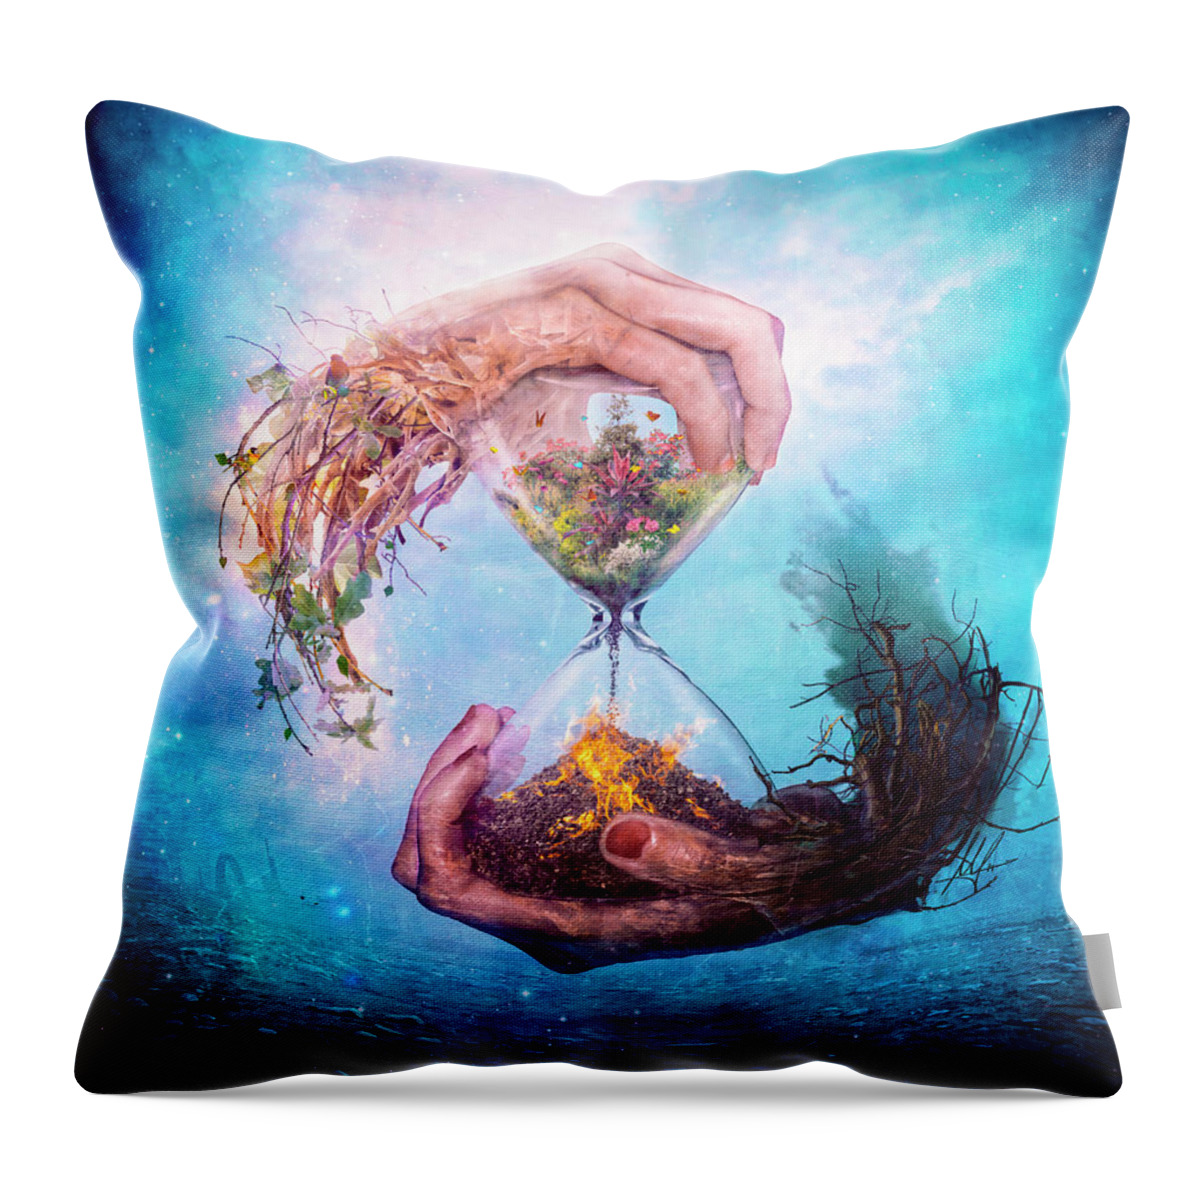 Surreal Throw Pillow featuring the digital art Where stories unfold by Mario Sanchez Nevado